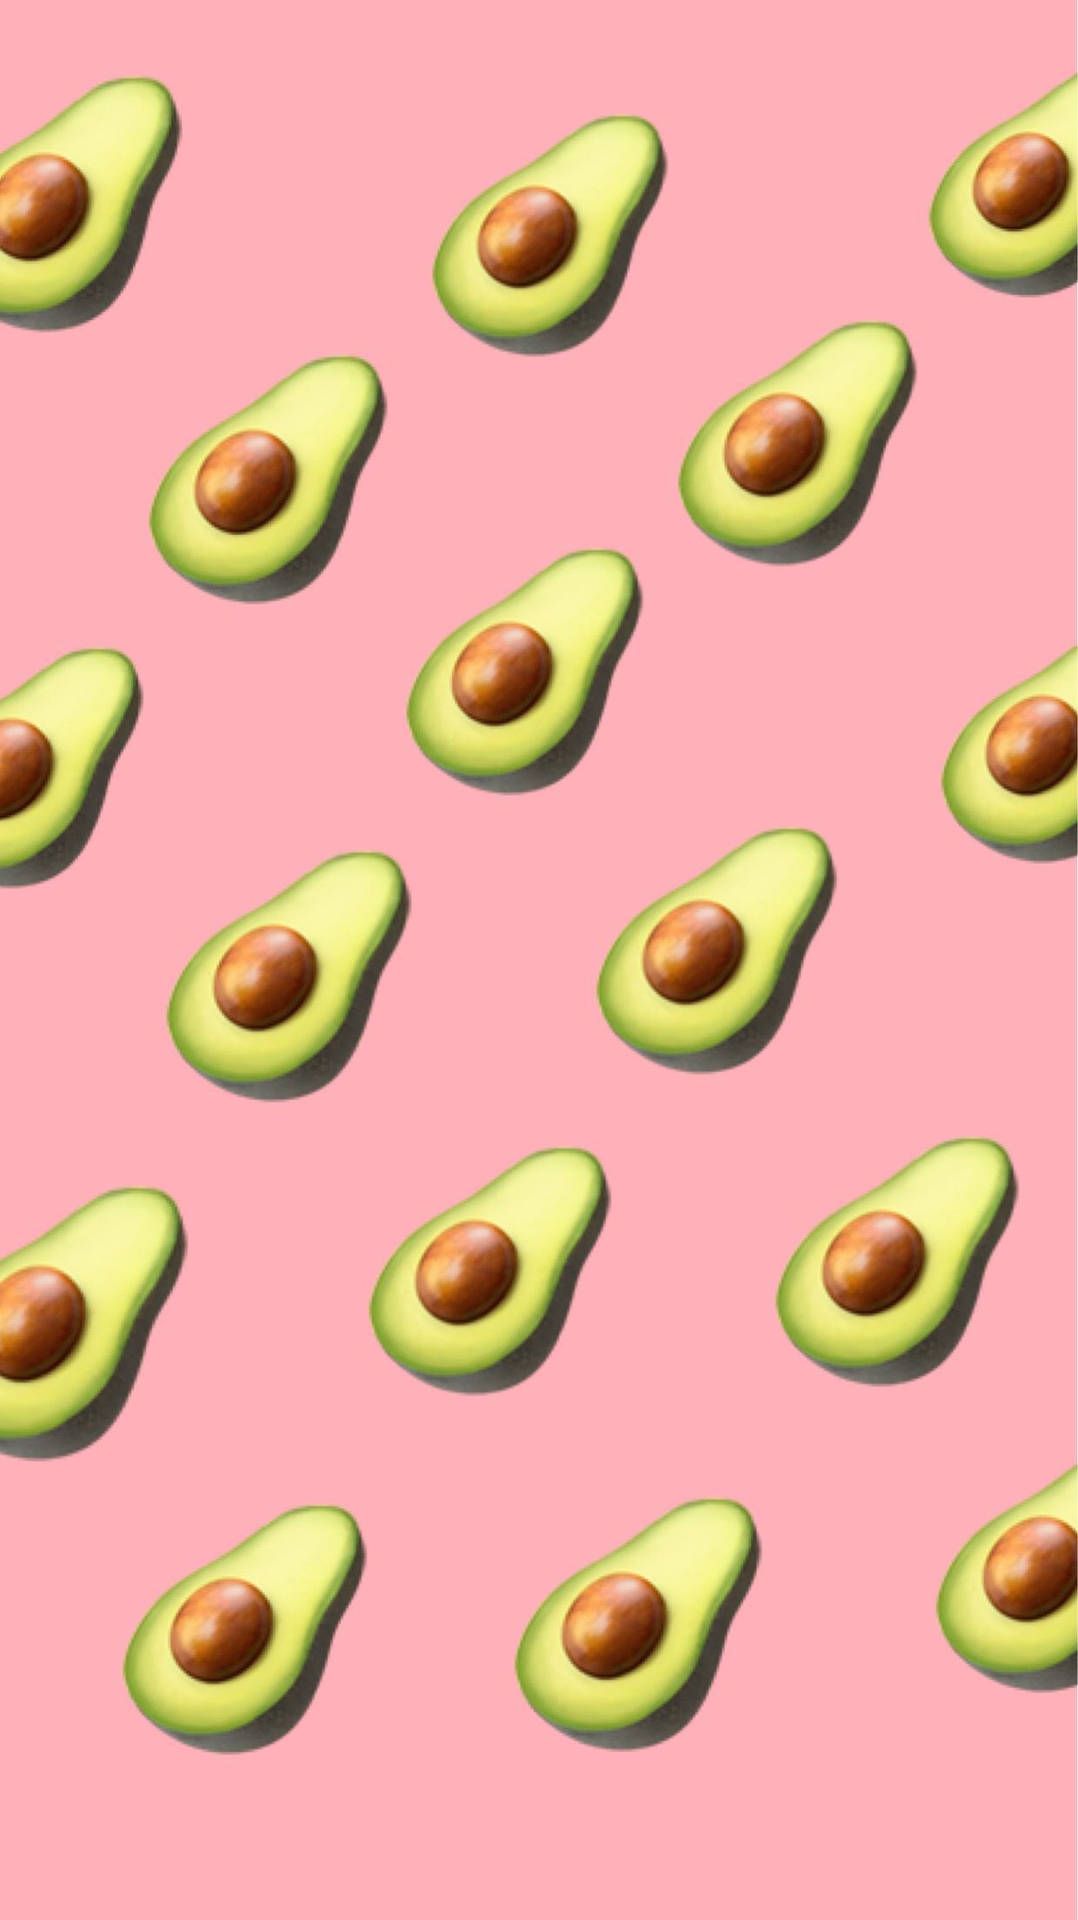 A pattern of avocados on pink background - Avocado